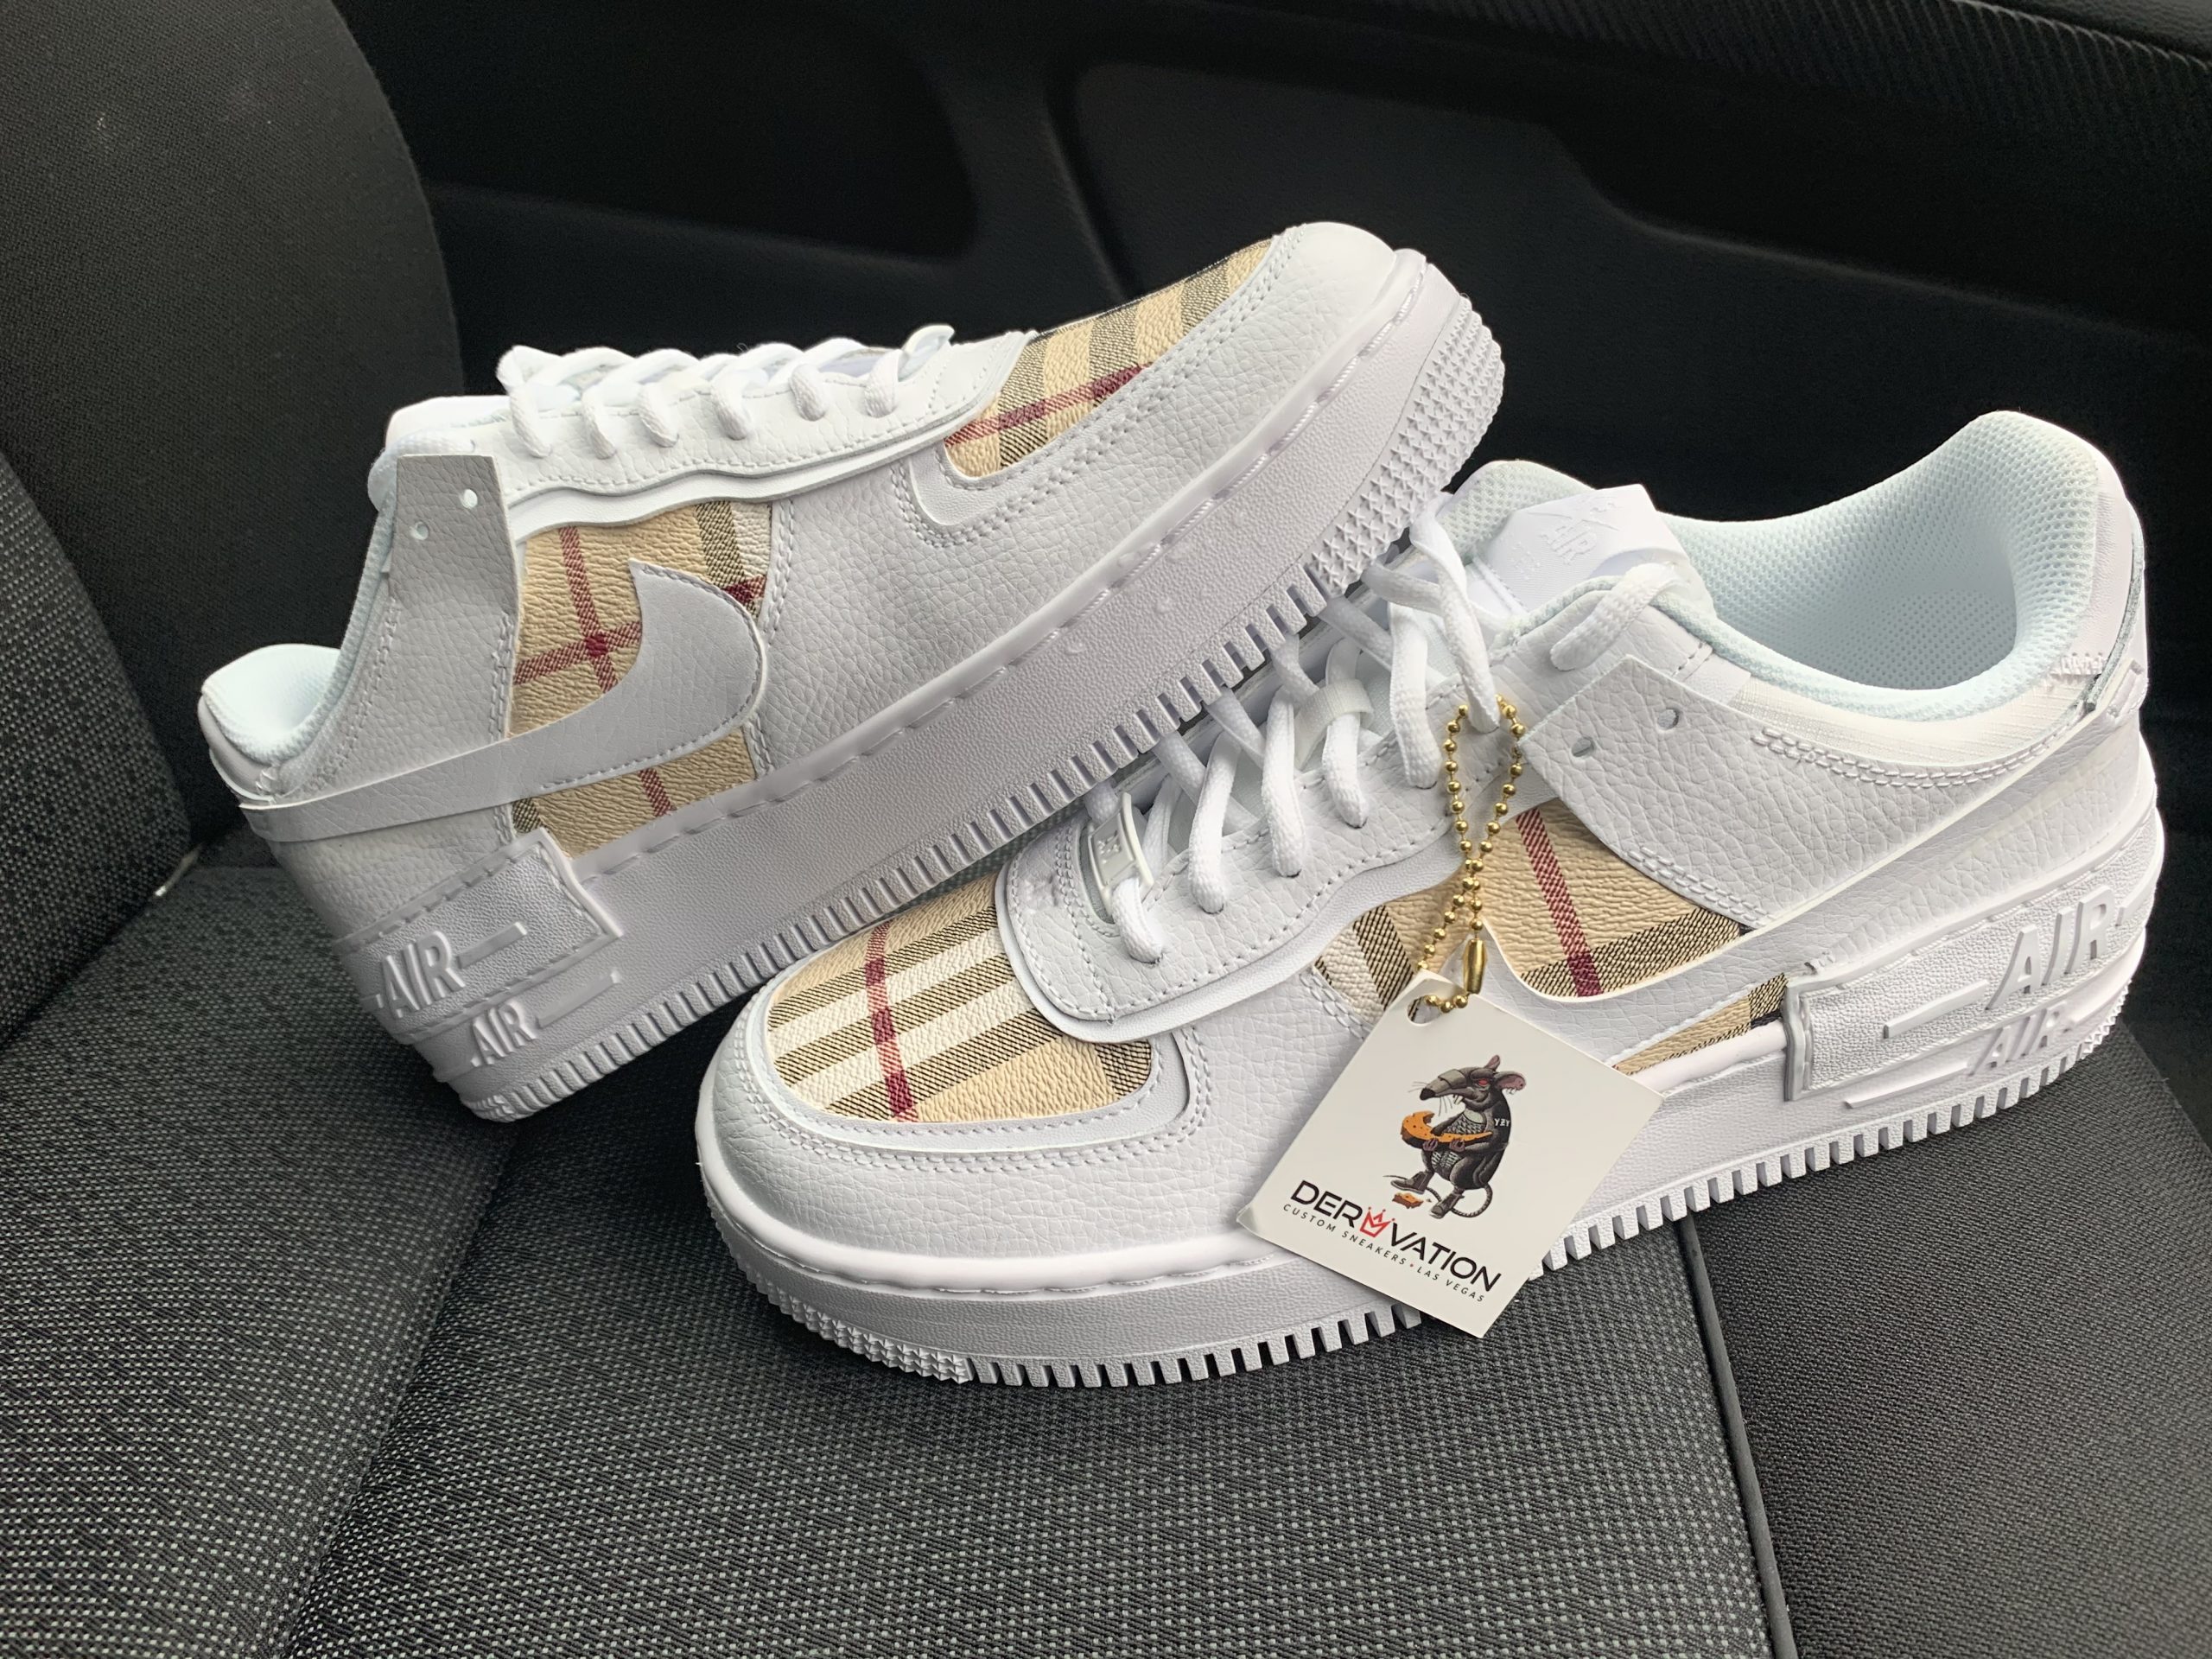 burberry nike air force shoes